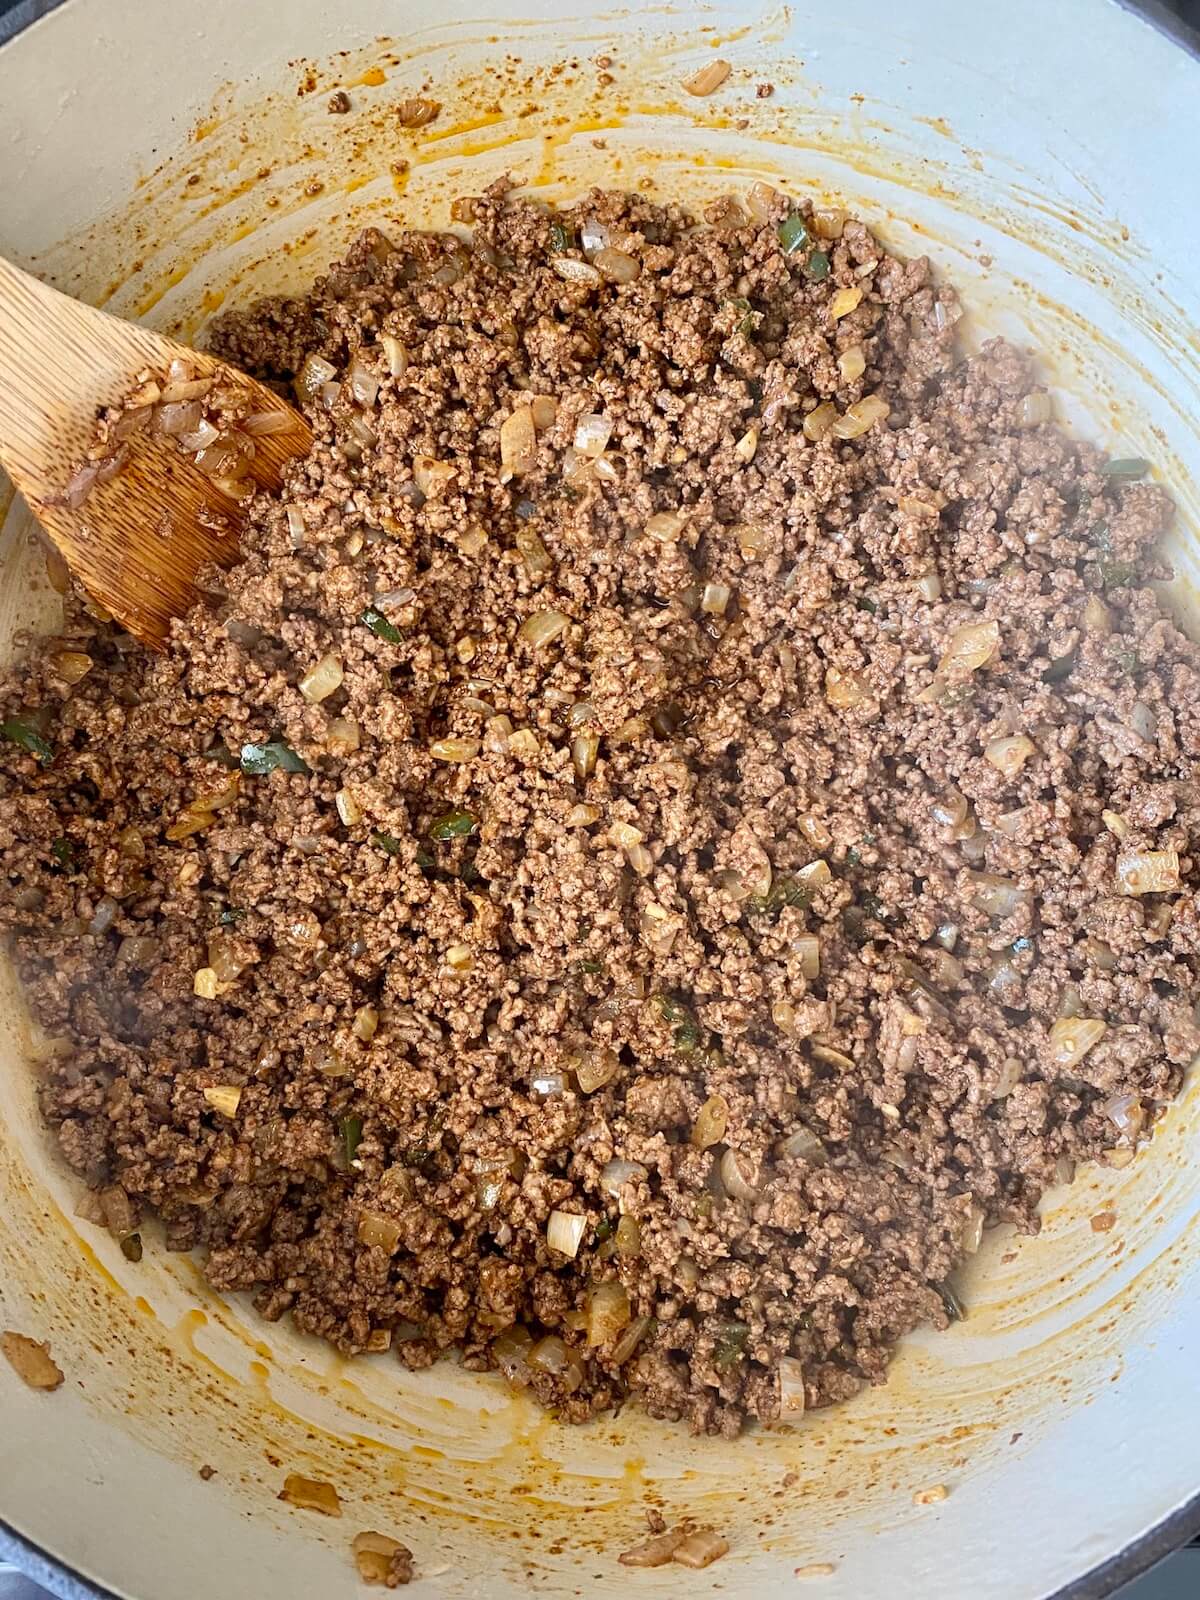 Cooked ground beef seasoned with chili powder, cumin, and cayenne pepper being sautéed in a dutch oven.